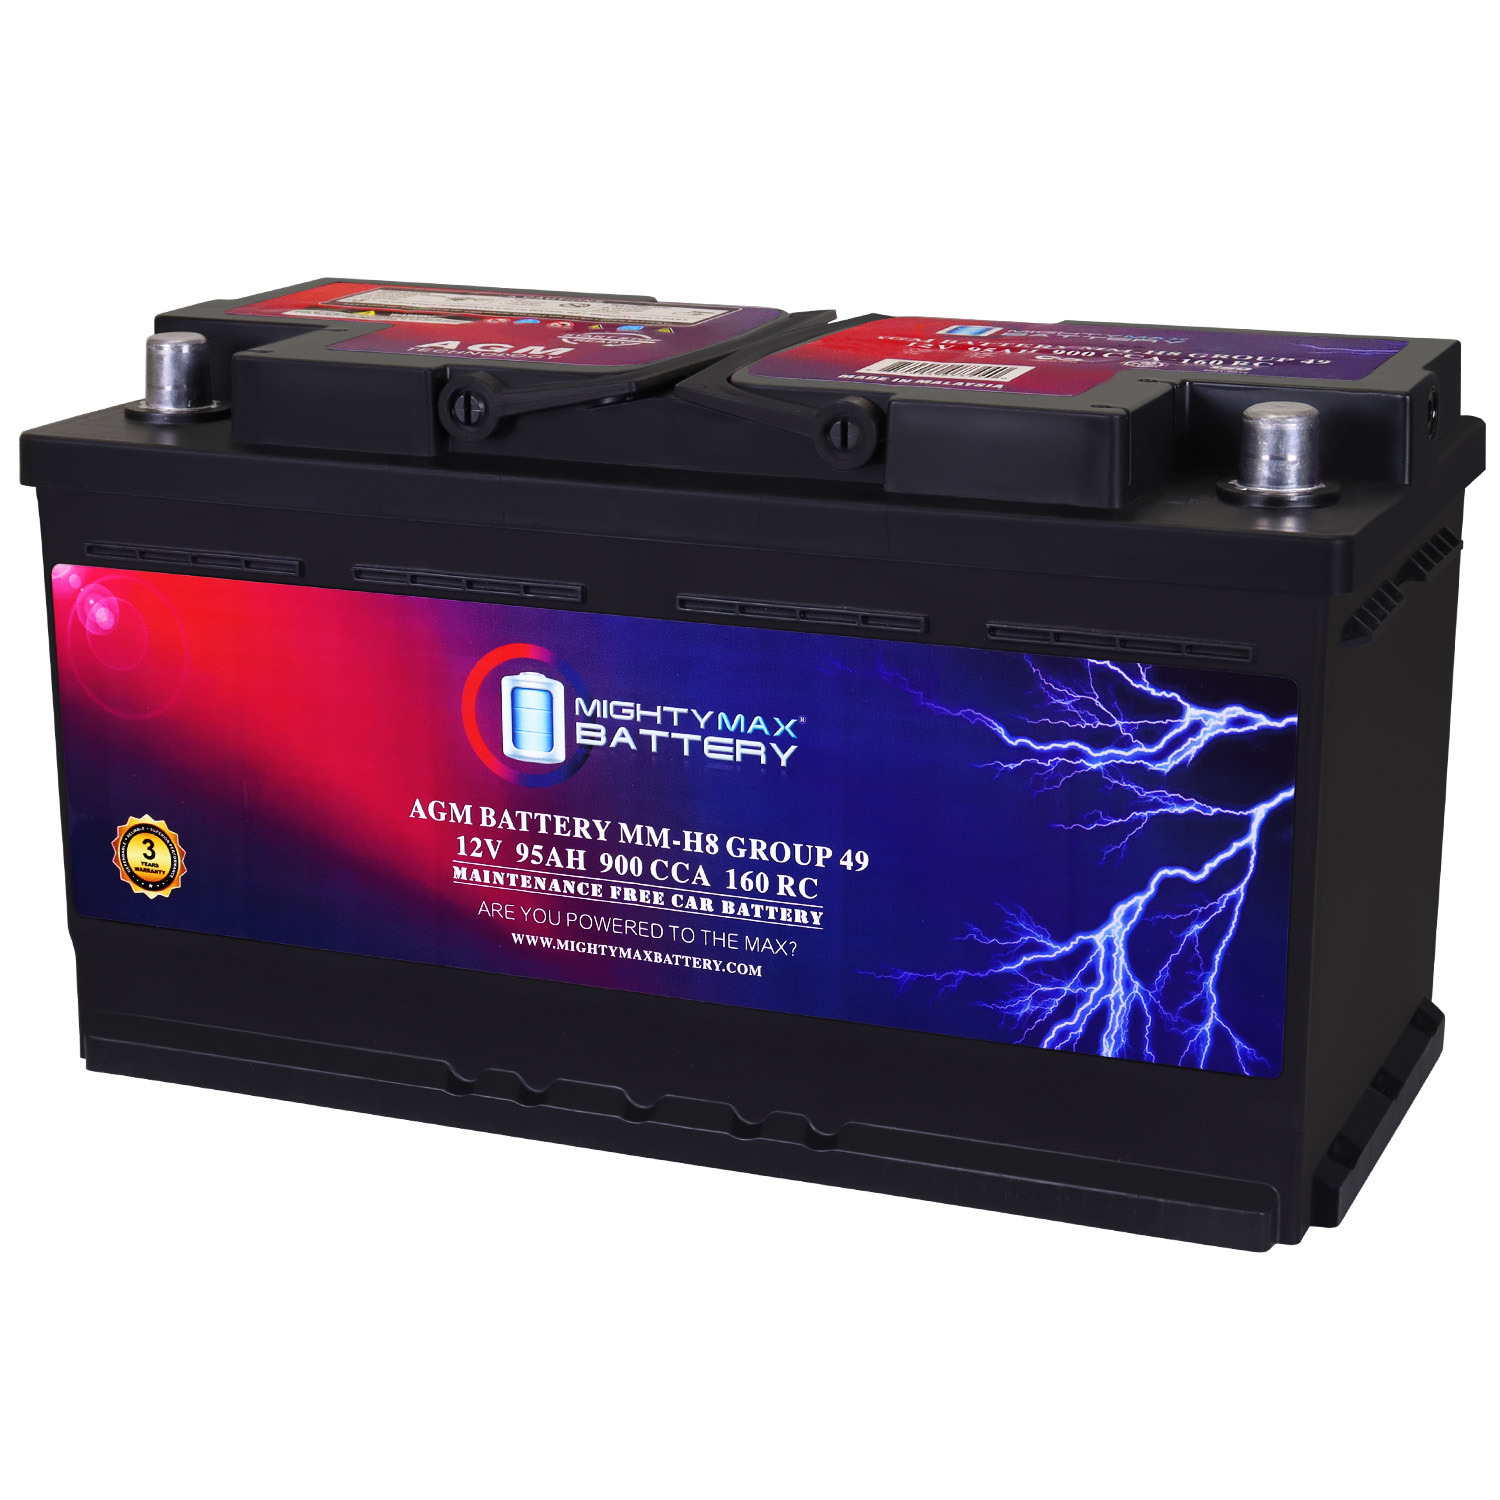 MM-H8 Group 49 12V 95Ah 160RC 900CCA Replacement Battery Compatible with Audi Allroad 13-16